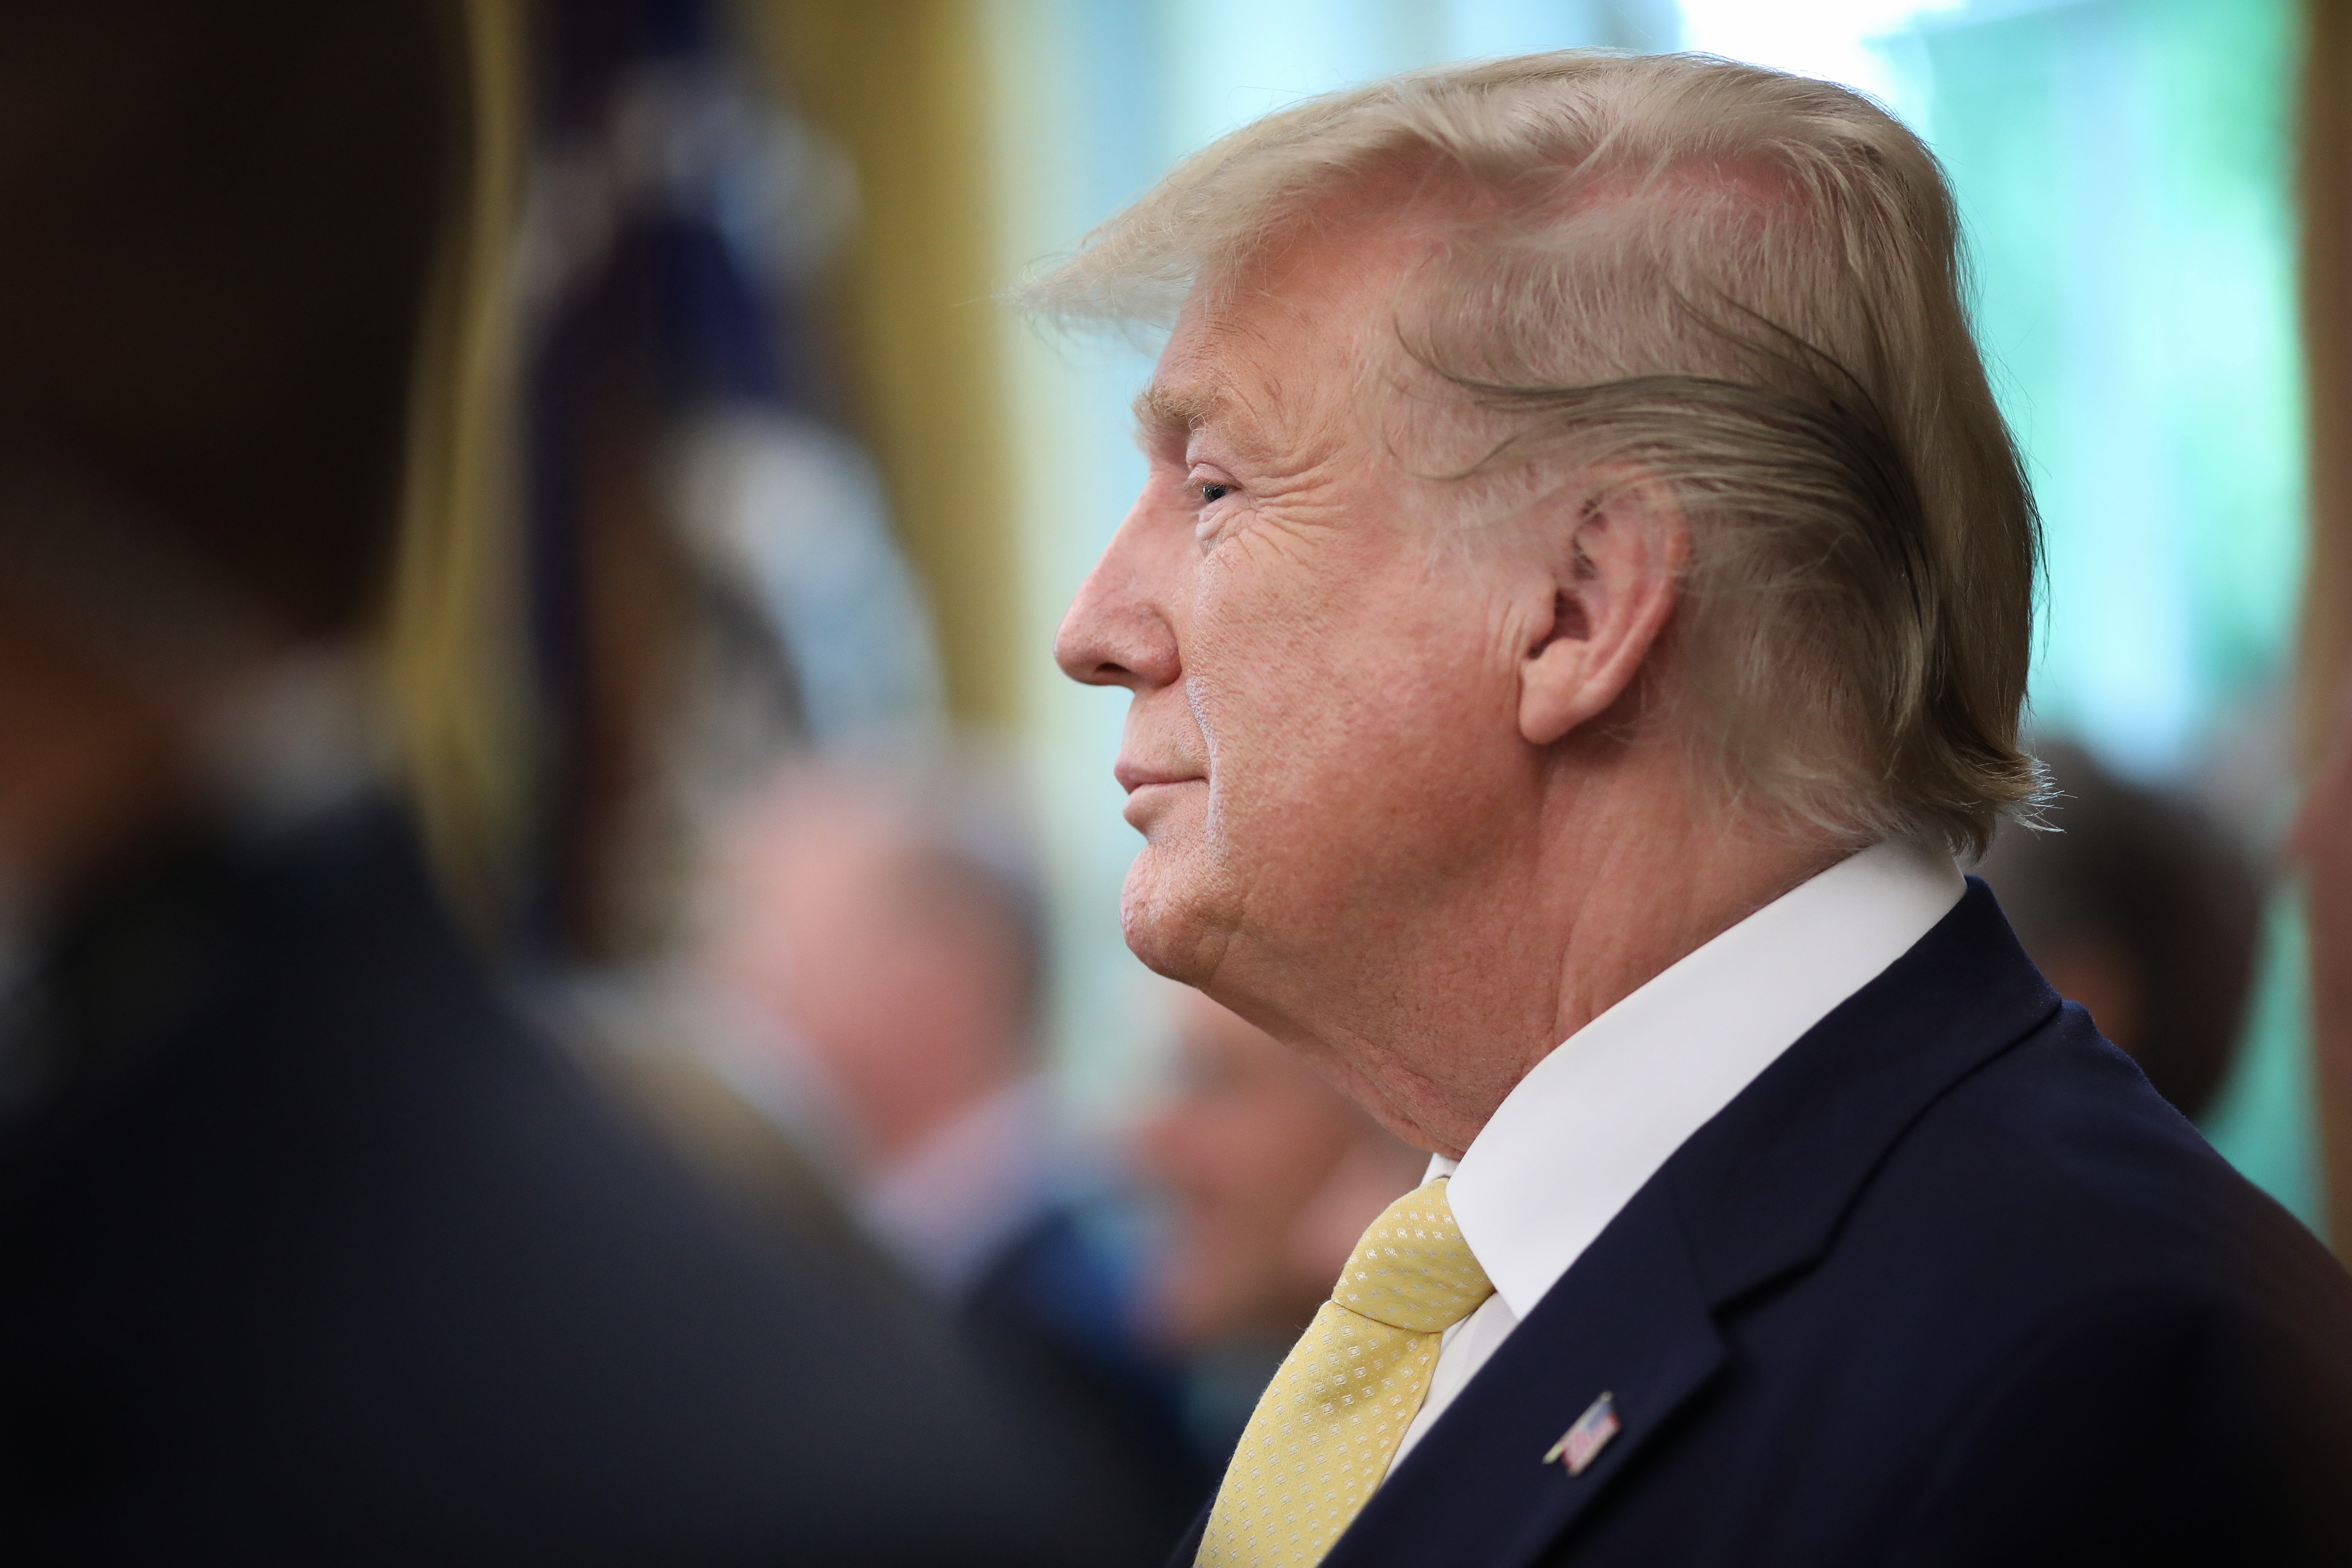 President Donald Trump attends a ceremony where he presented the Presidential Medal of Freedom to economist Arthur Laffer on June 19, 2019 in Washington, DC.